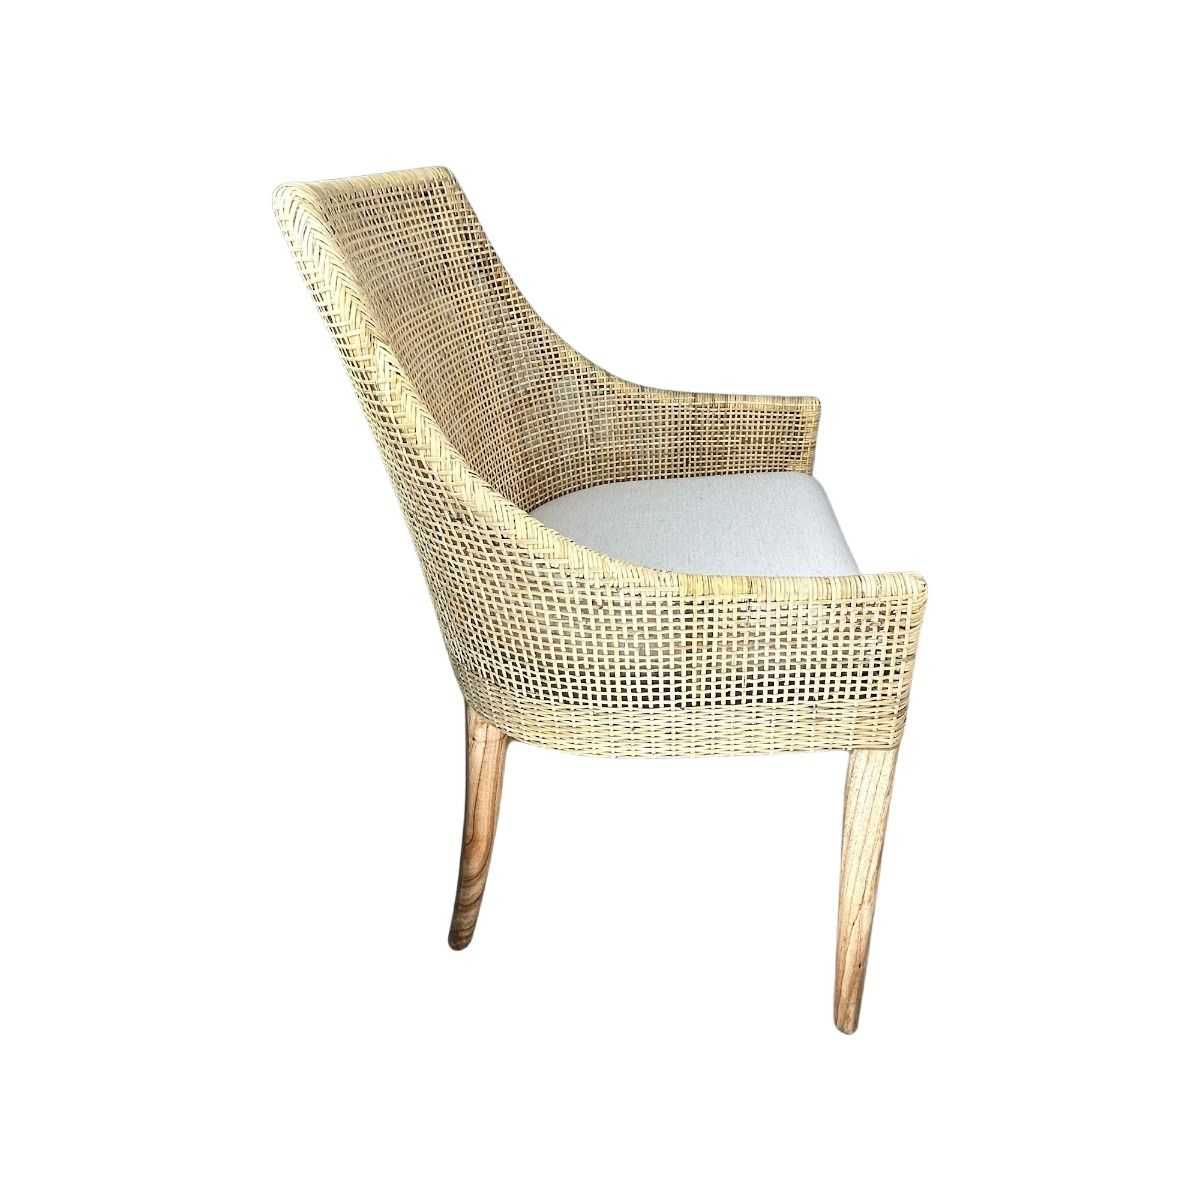 CR Tennessee Rattan Dining Chair